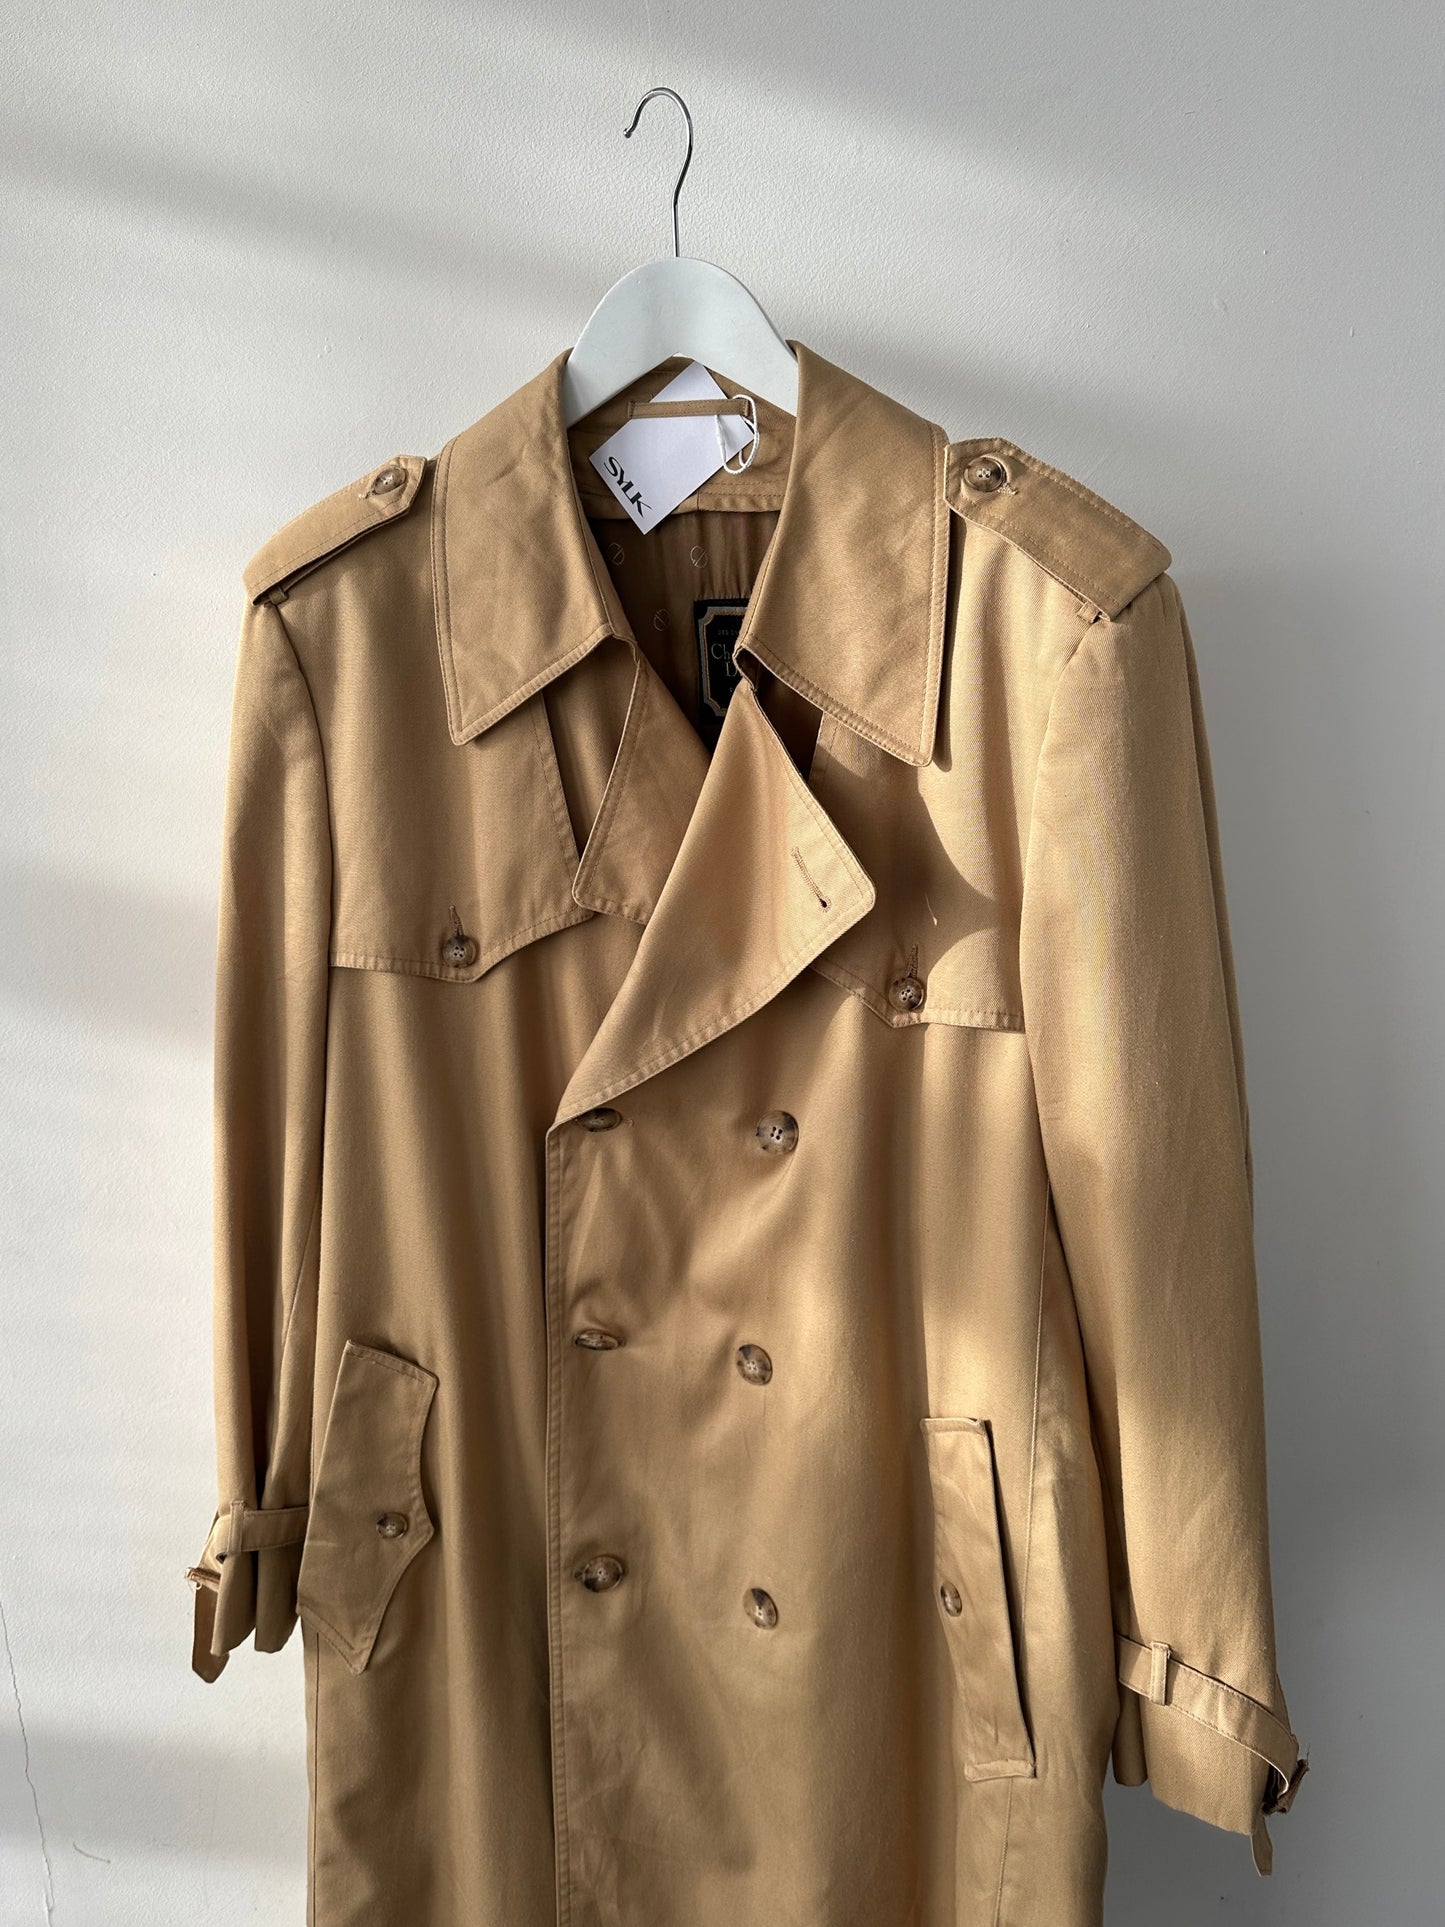 Christian Dior Cotton Double Breasted Trench Coat - L/XL